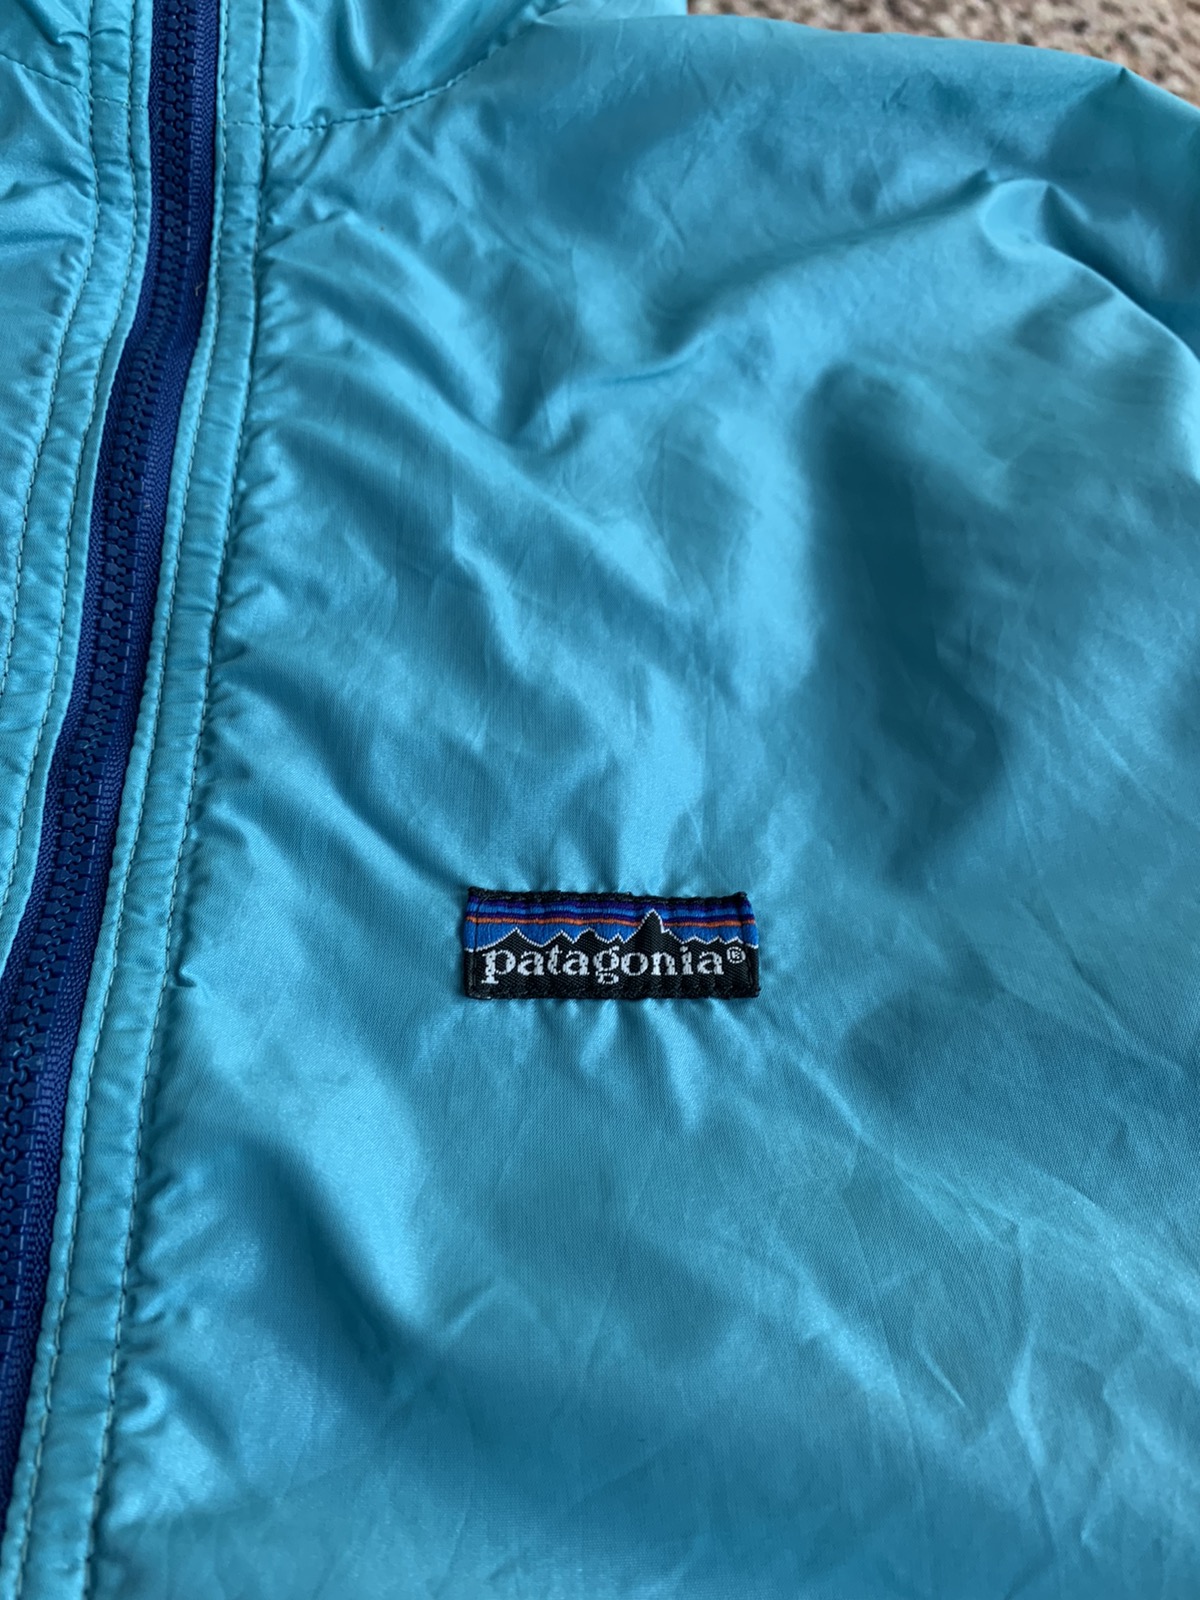 patagonia bomber jacket for 10 years old kids - 5